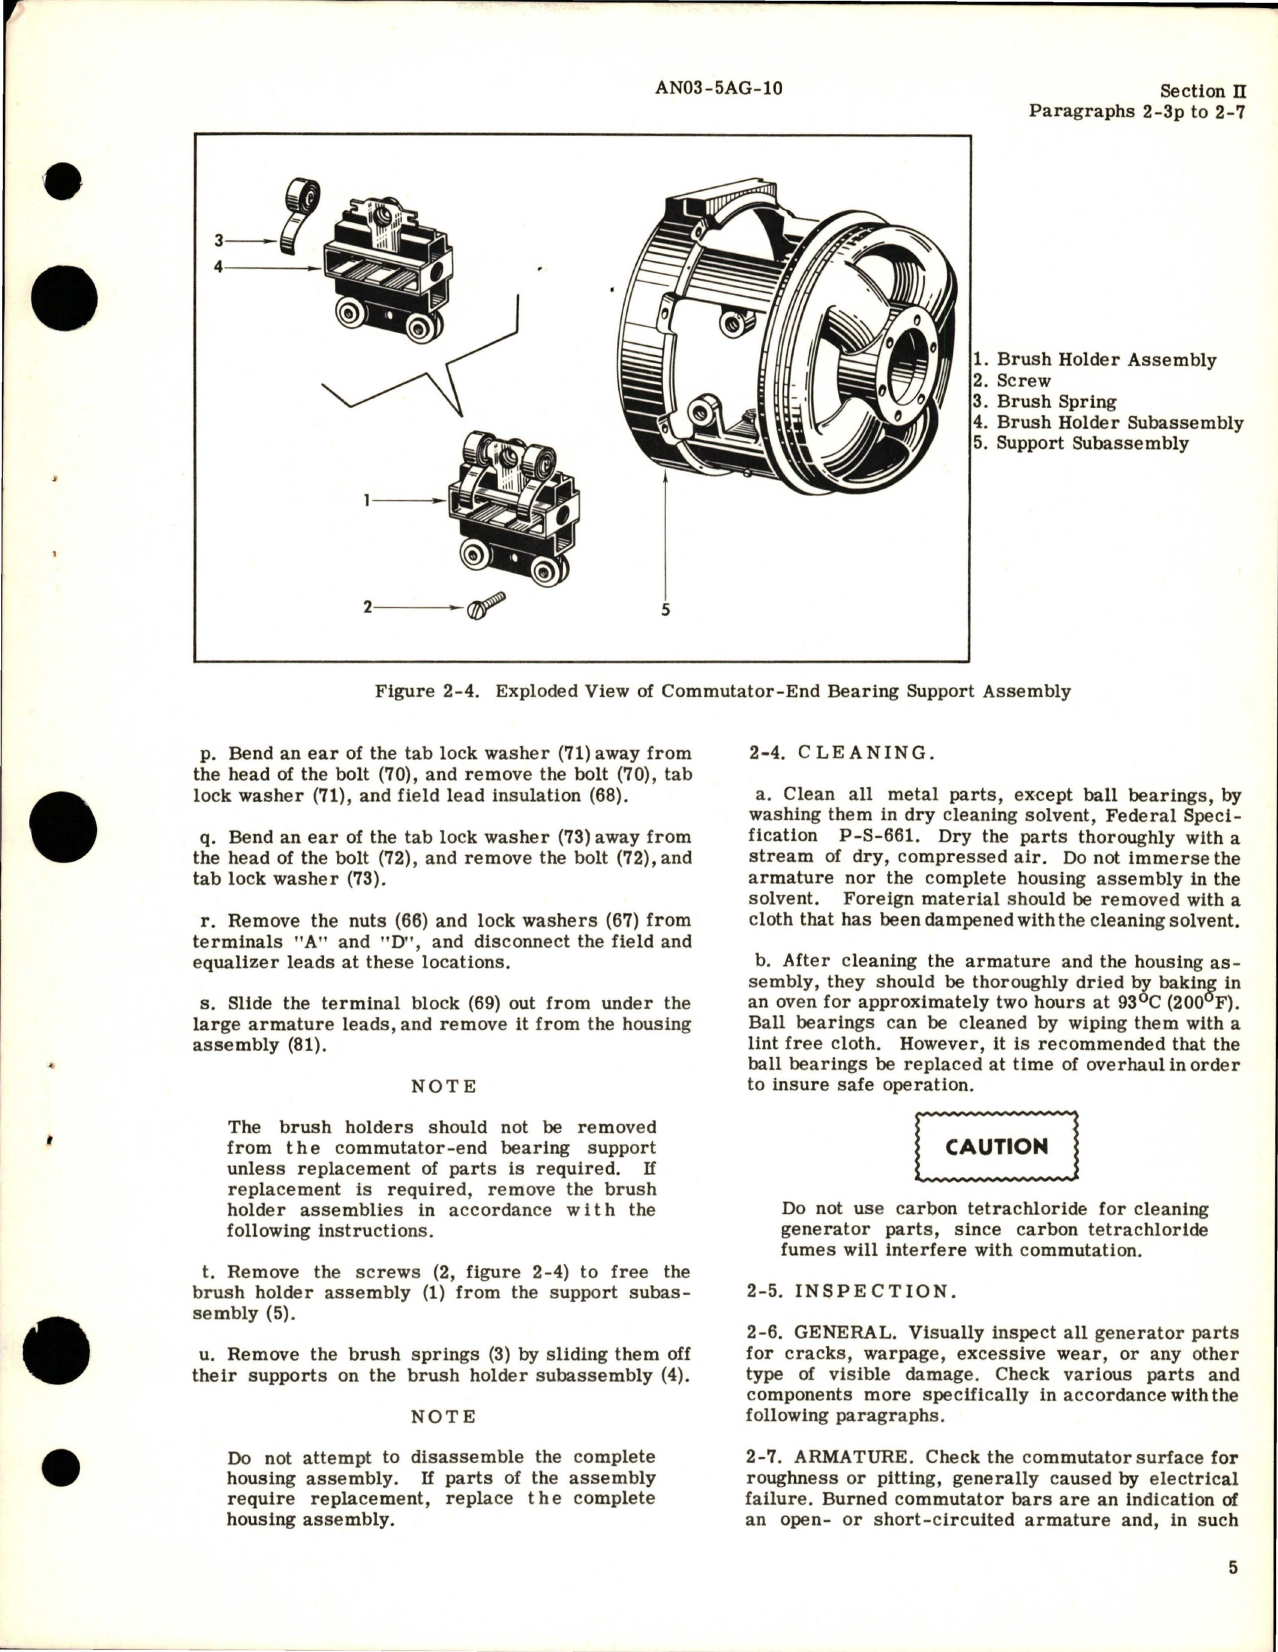 Sample page 5 from AirCorps Library document: Overhaul Instructions for Generator - Models G300, G300-3, G300-3C, G300-4A, G300-4B, G300-6BT, and G300-600A